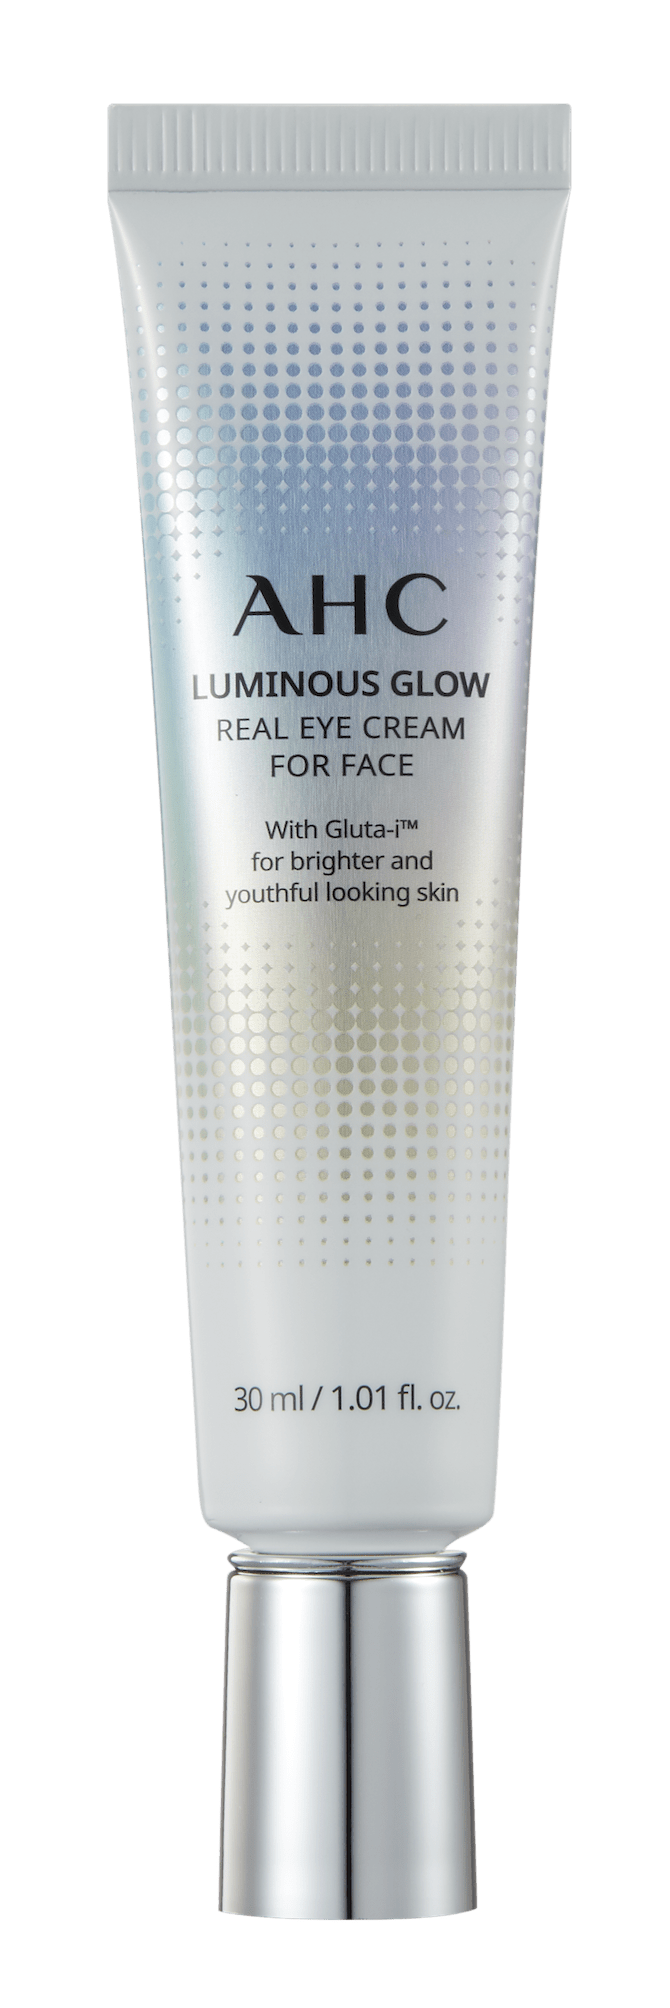 AHC Luminous Glow Real Eye Cream for Face